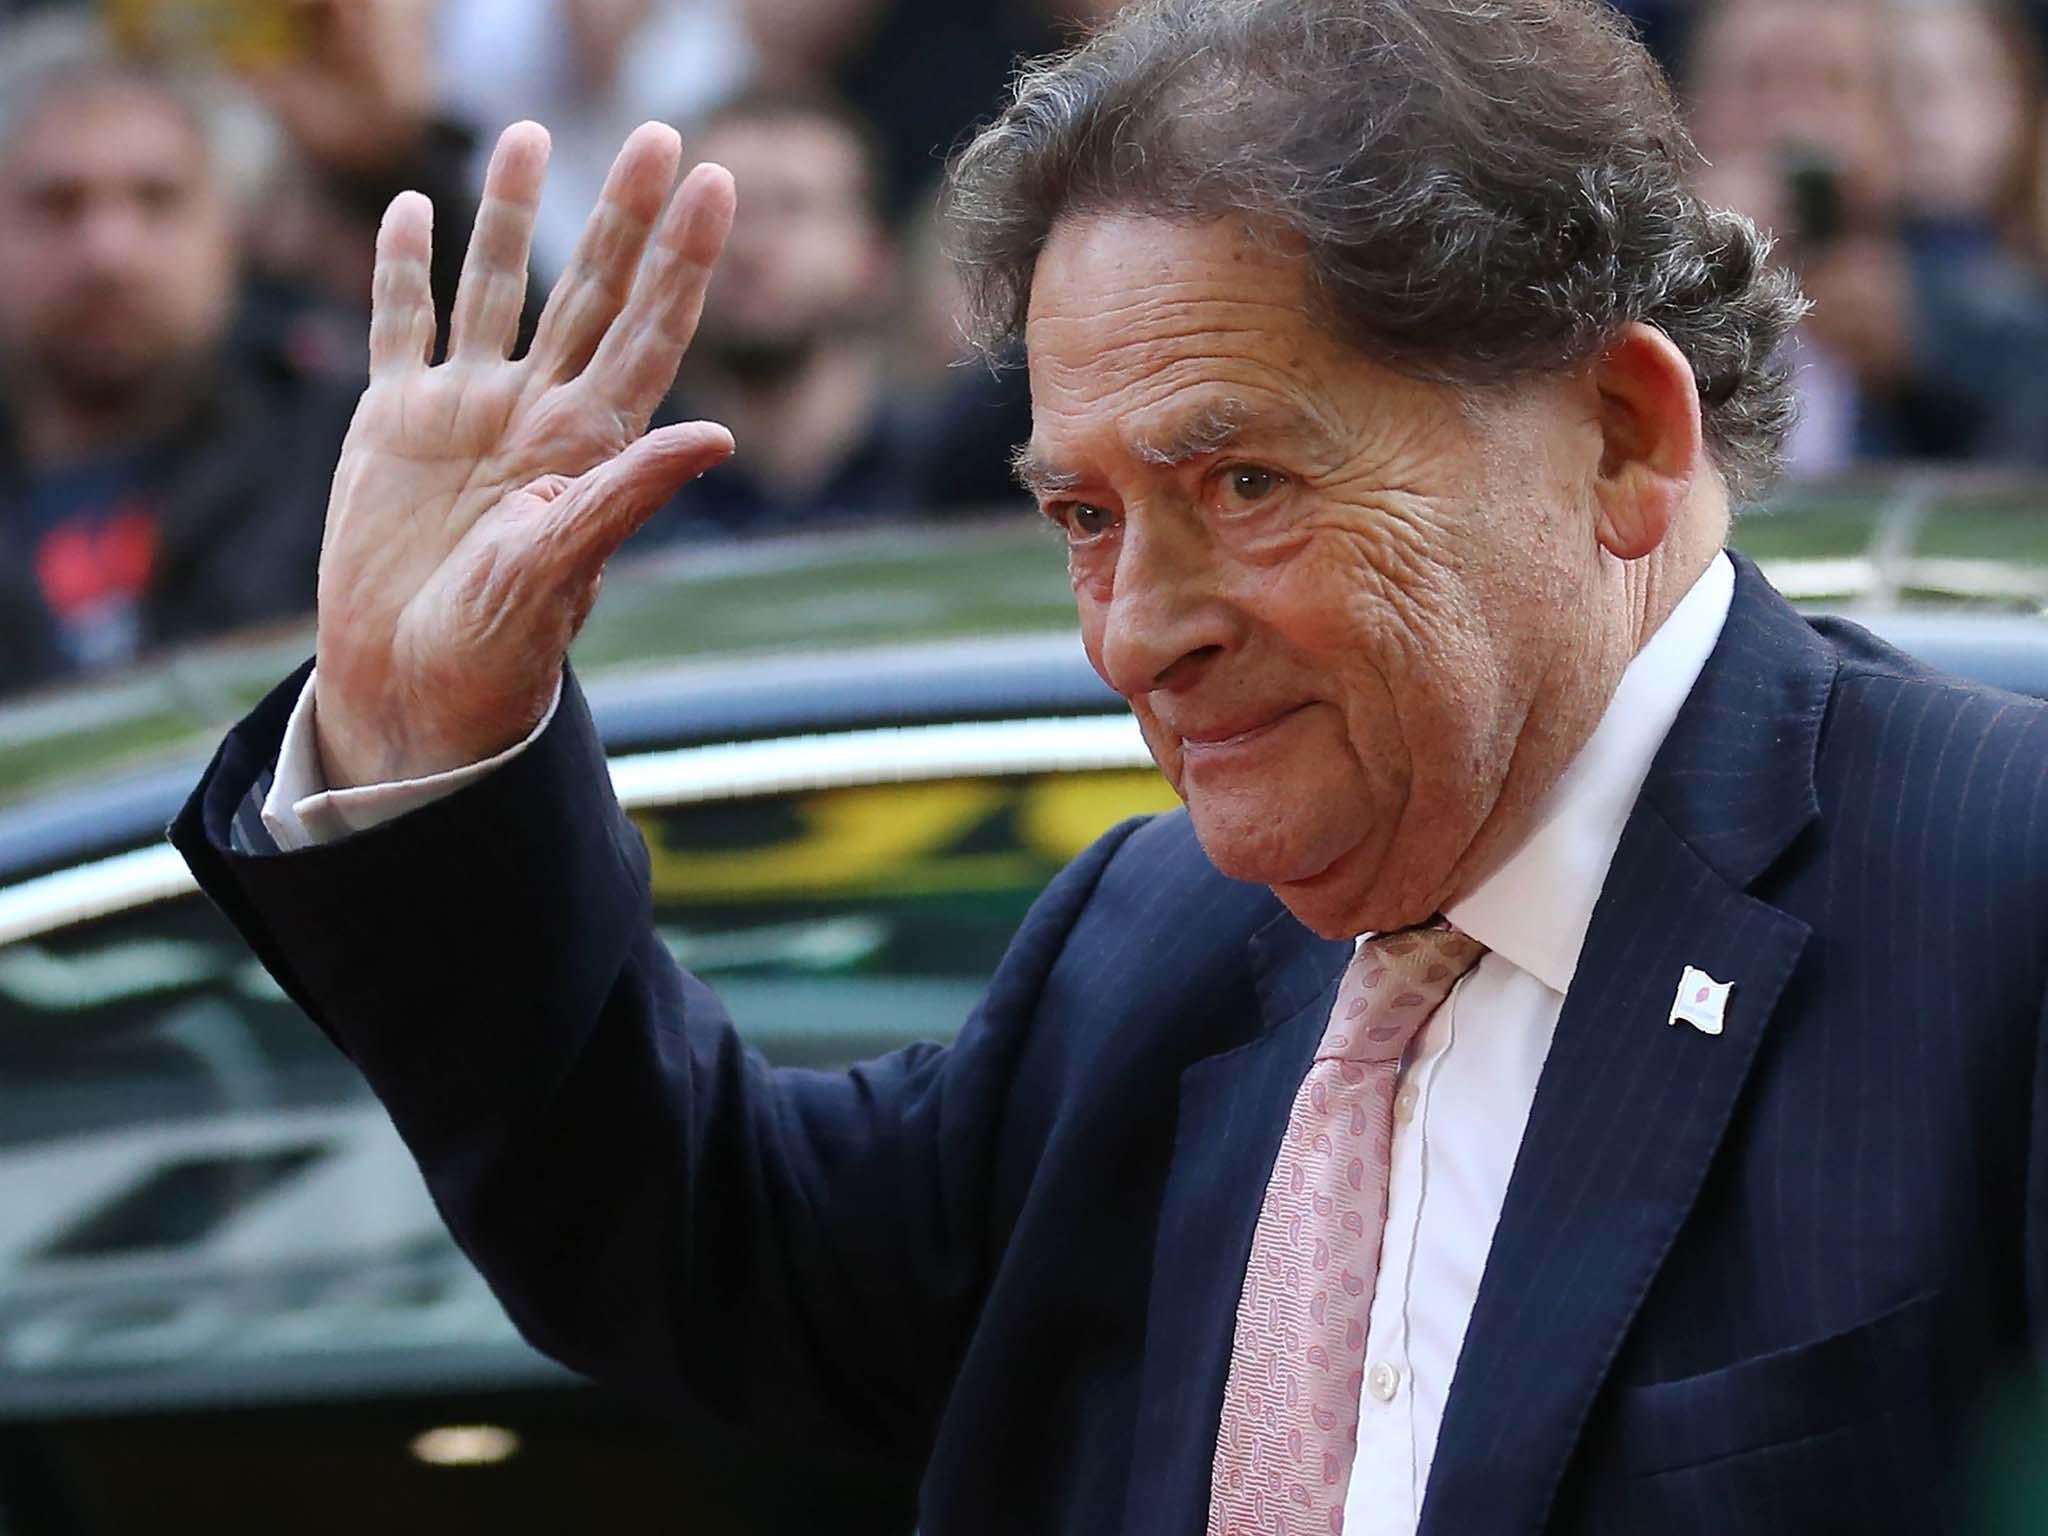 Lord Lawson, a former Chancellor of the Exchequer, is the most prominent supporter of Leave Means Leave